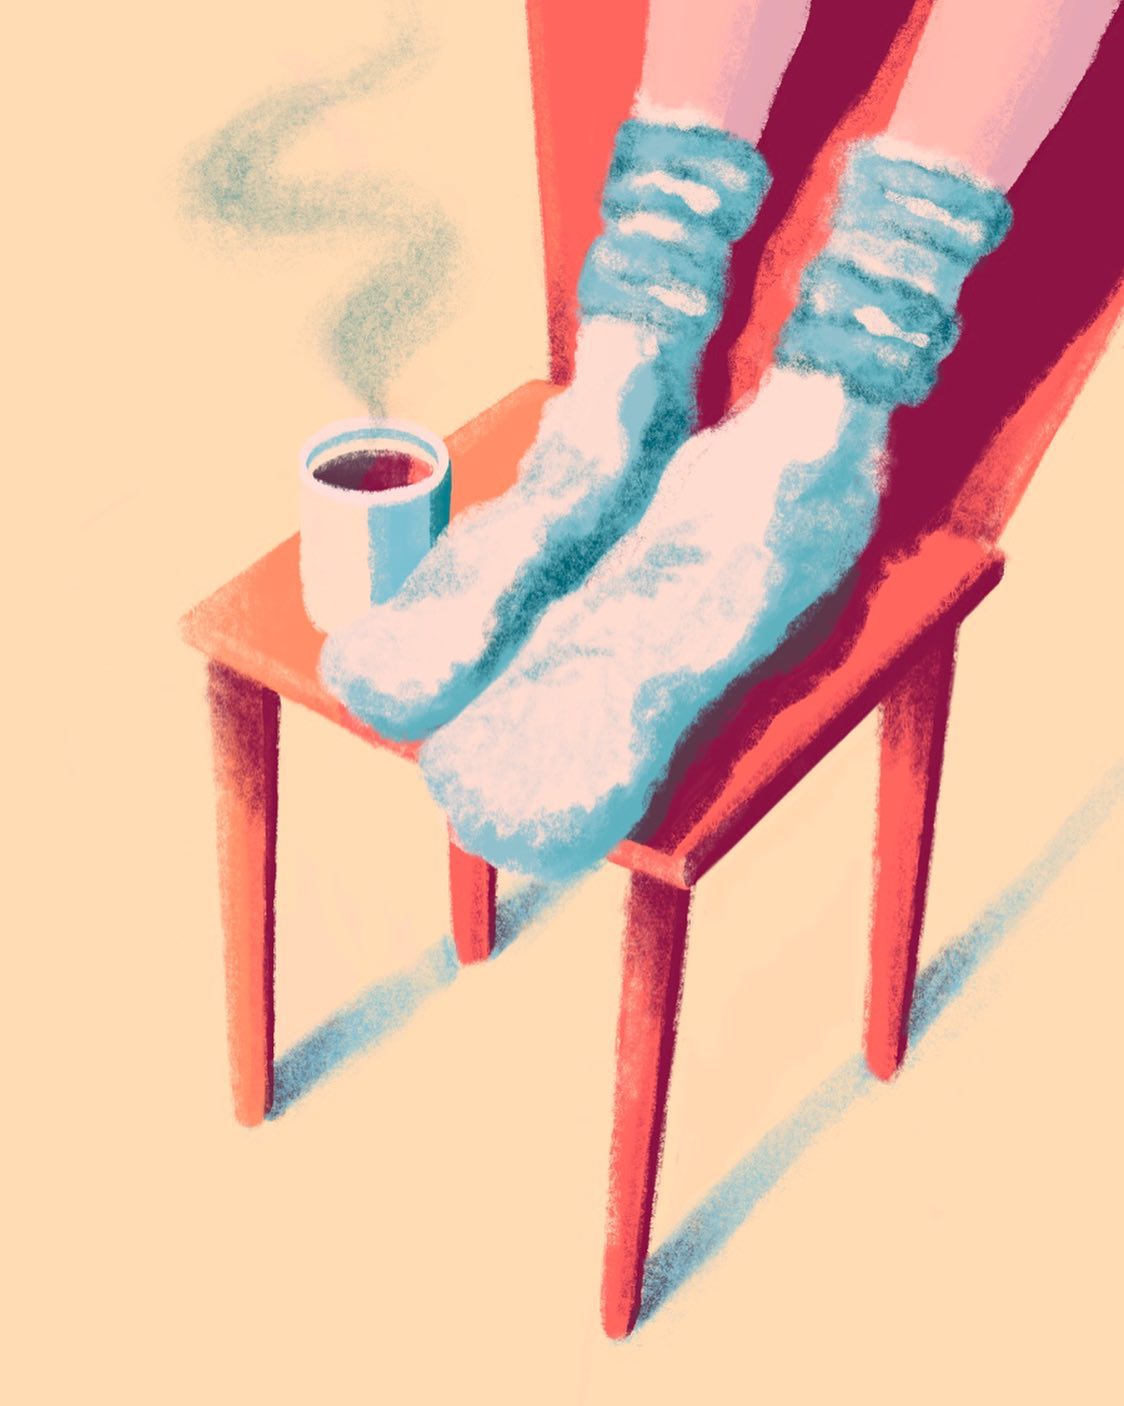 When I’m sick, I wear big fluffy socks and drink tea. If fluffy socks were to get sick, would they wear legs? Should also ask about tea. Digital art.